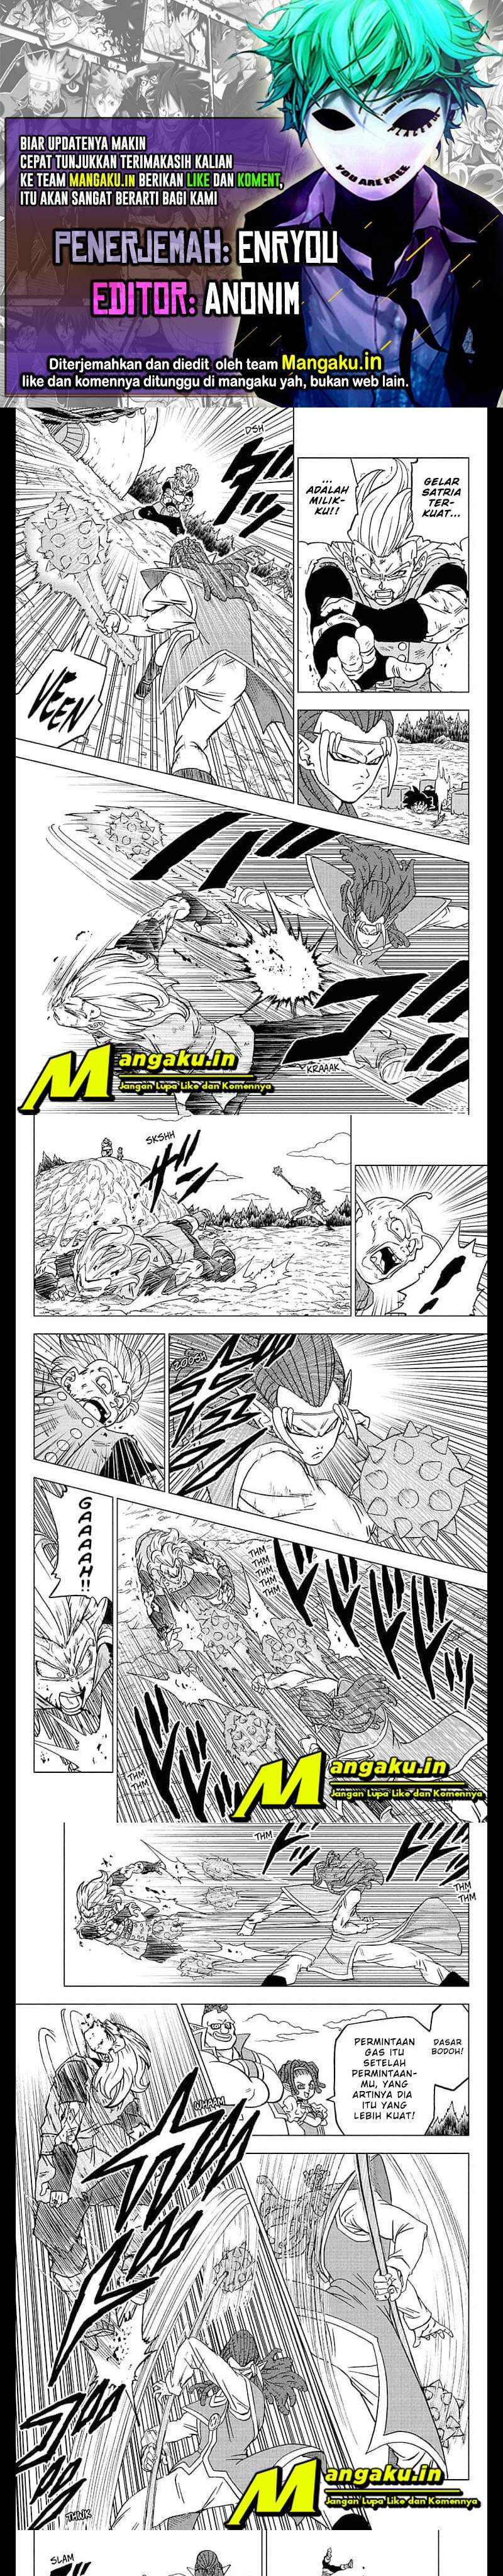 Dragon Ball Super: Chapter 78.2 - Page 1